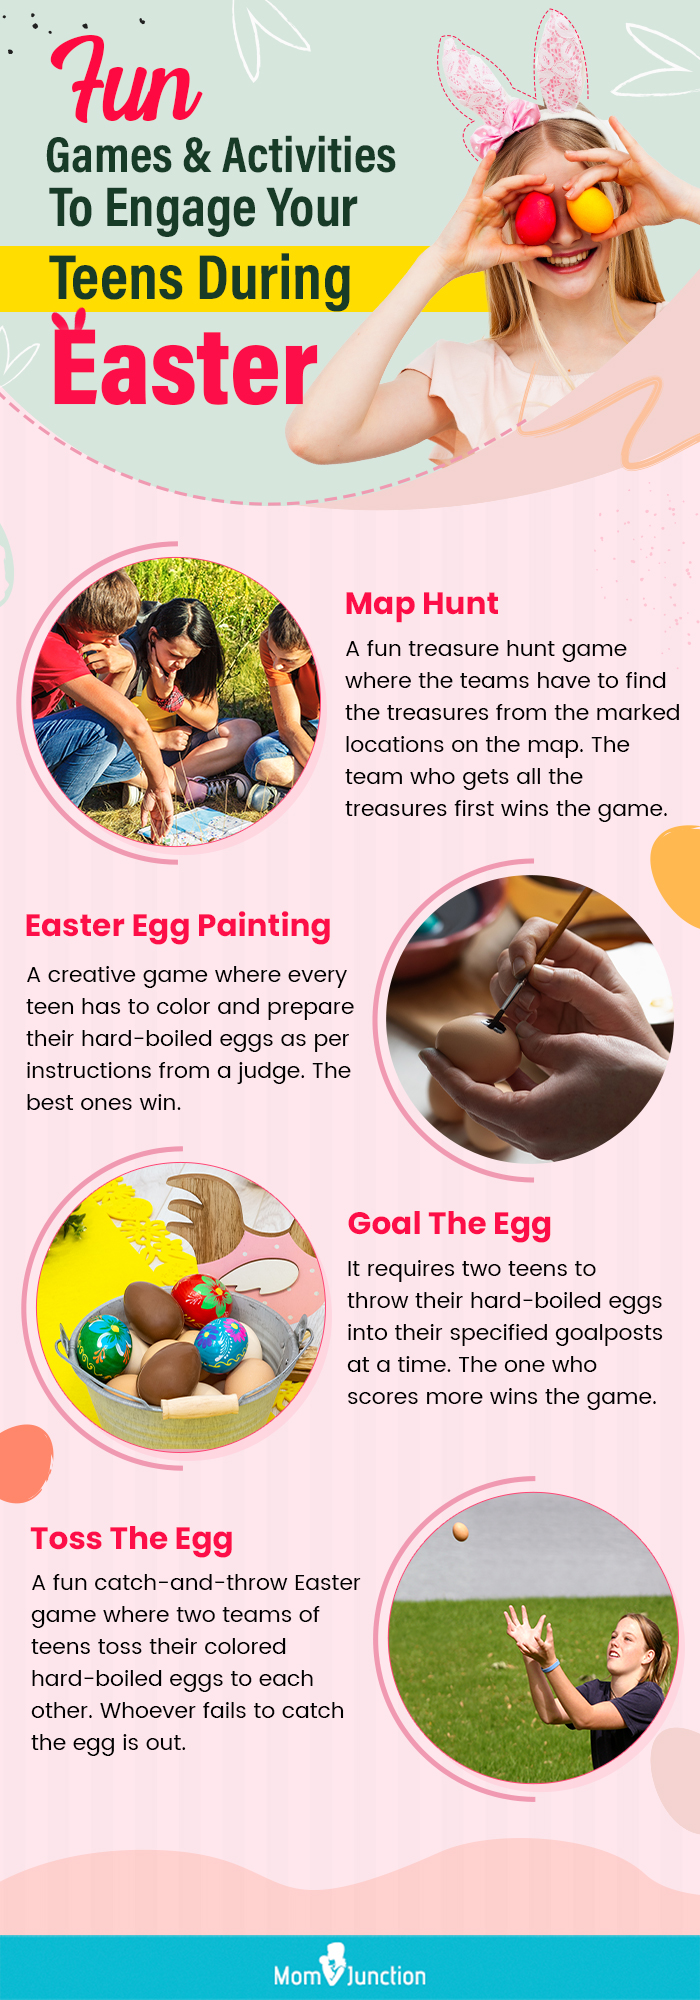 fun games & activities to engage your teens during easter (infographic)